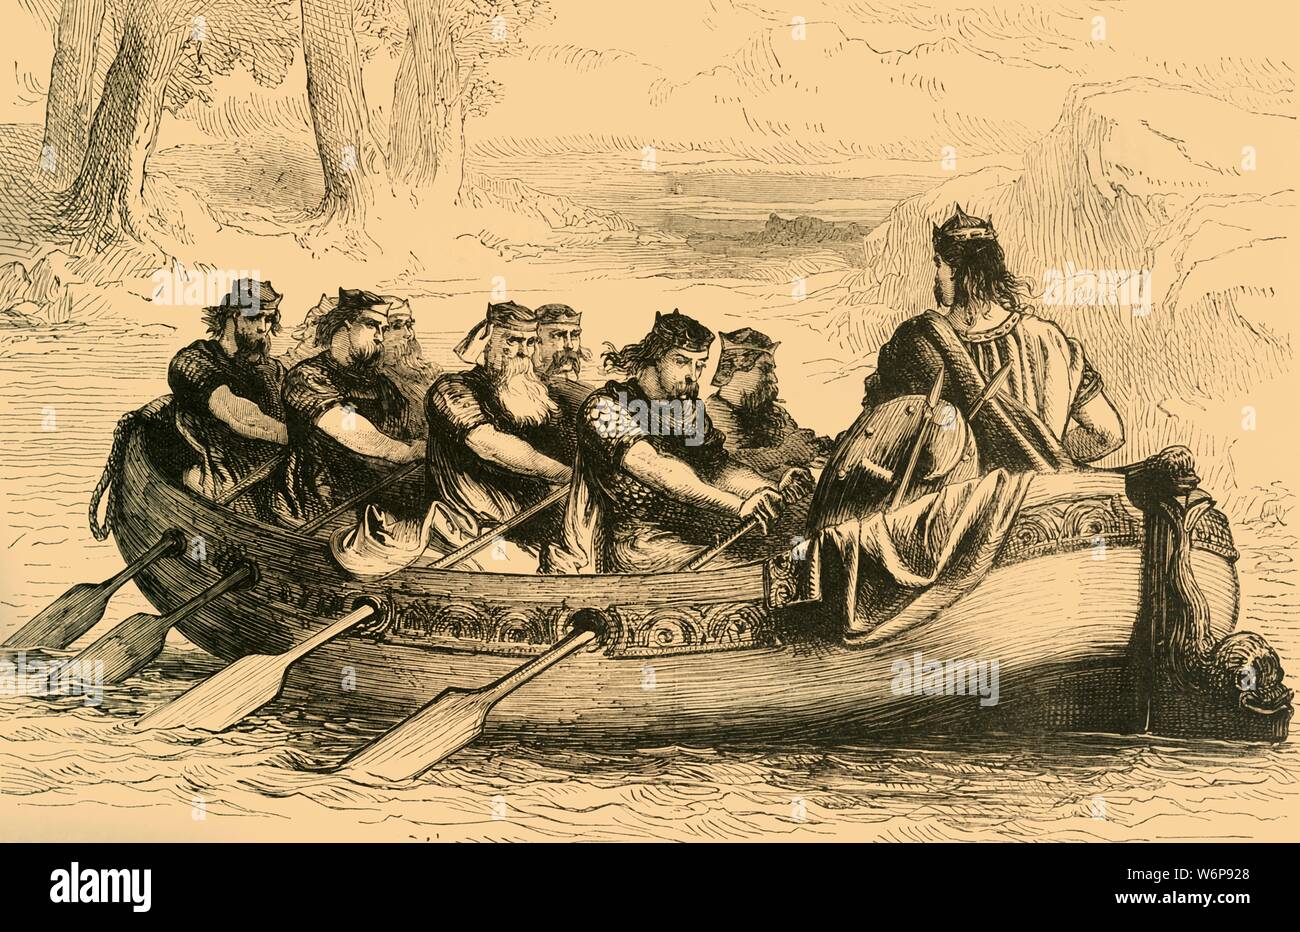 'Edgar the Pacific being rowed down the River Dee by Eight Tributary Princes', c1890. Edgar the Peaceful ( c943-975). Legend has it, following his coronation, eight kings including Kenneth II of Scotland and Mael Coluim, King of Strathclyde pledged allegiance and took to the oars of his state barge on the River Dee near Chester. From &quot;Cassell's Illustrated History of England&quot;. Stock Photo